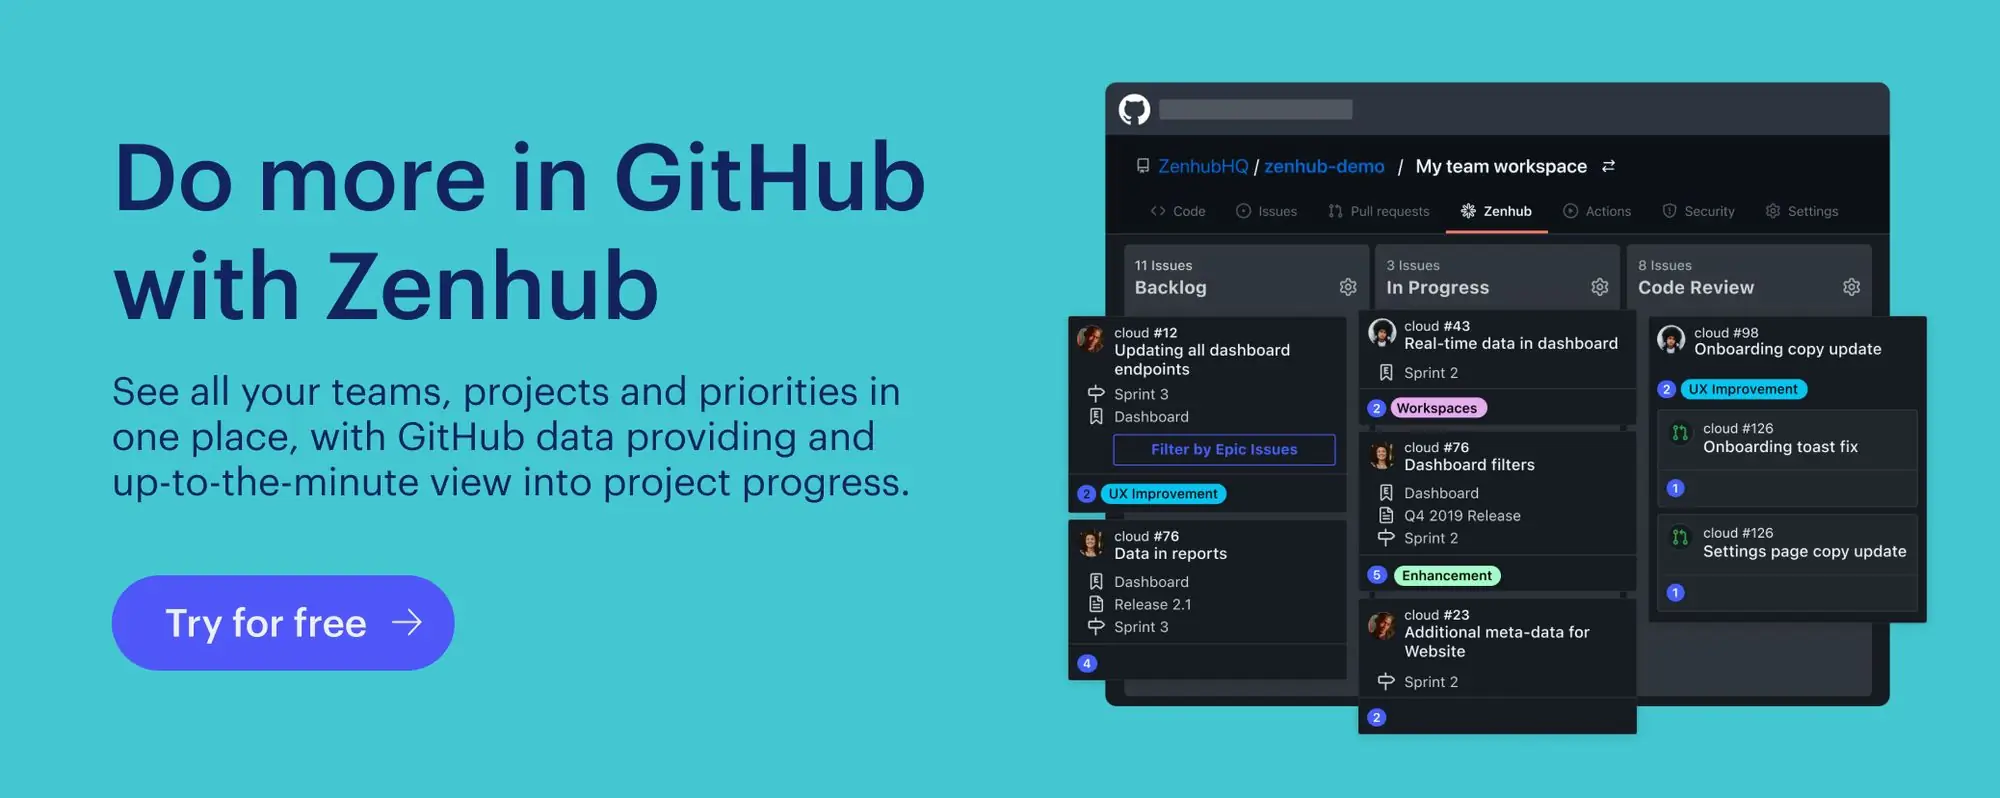 Describes how to use ZenHub with your GitHub data to see all your teams, projects, and priorities in one place.